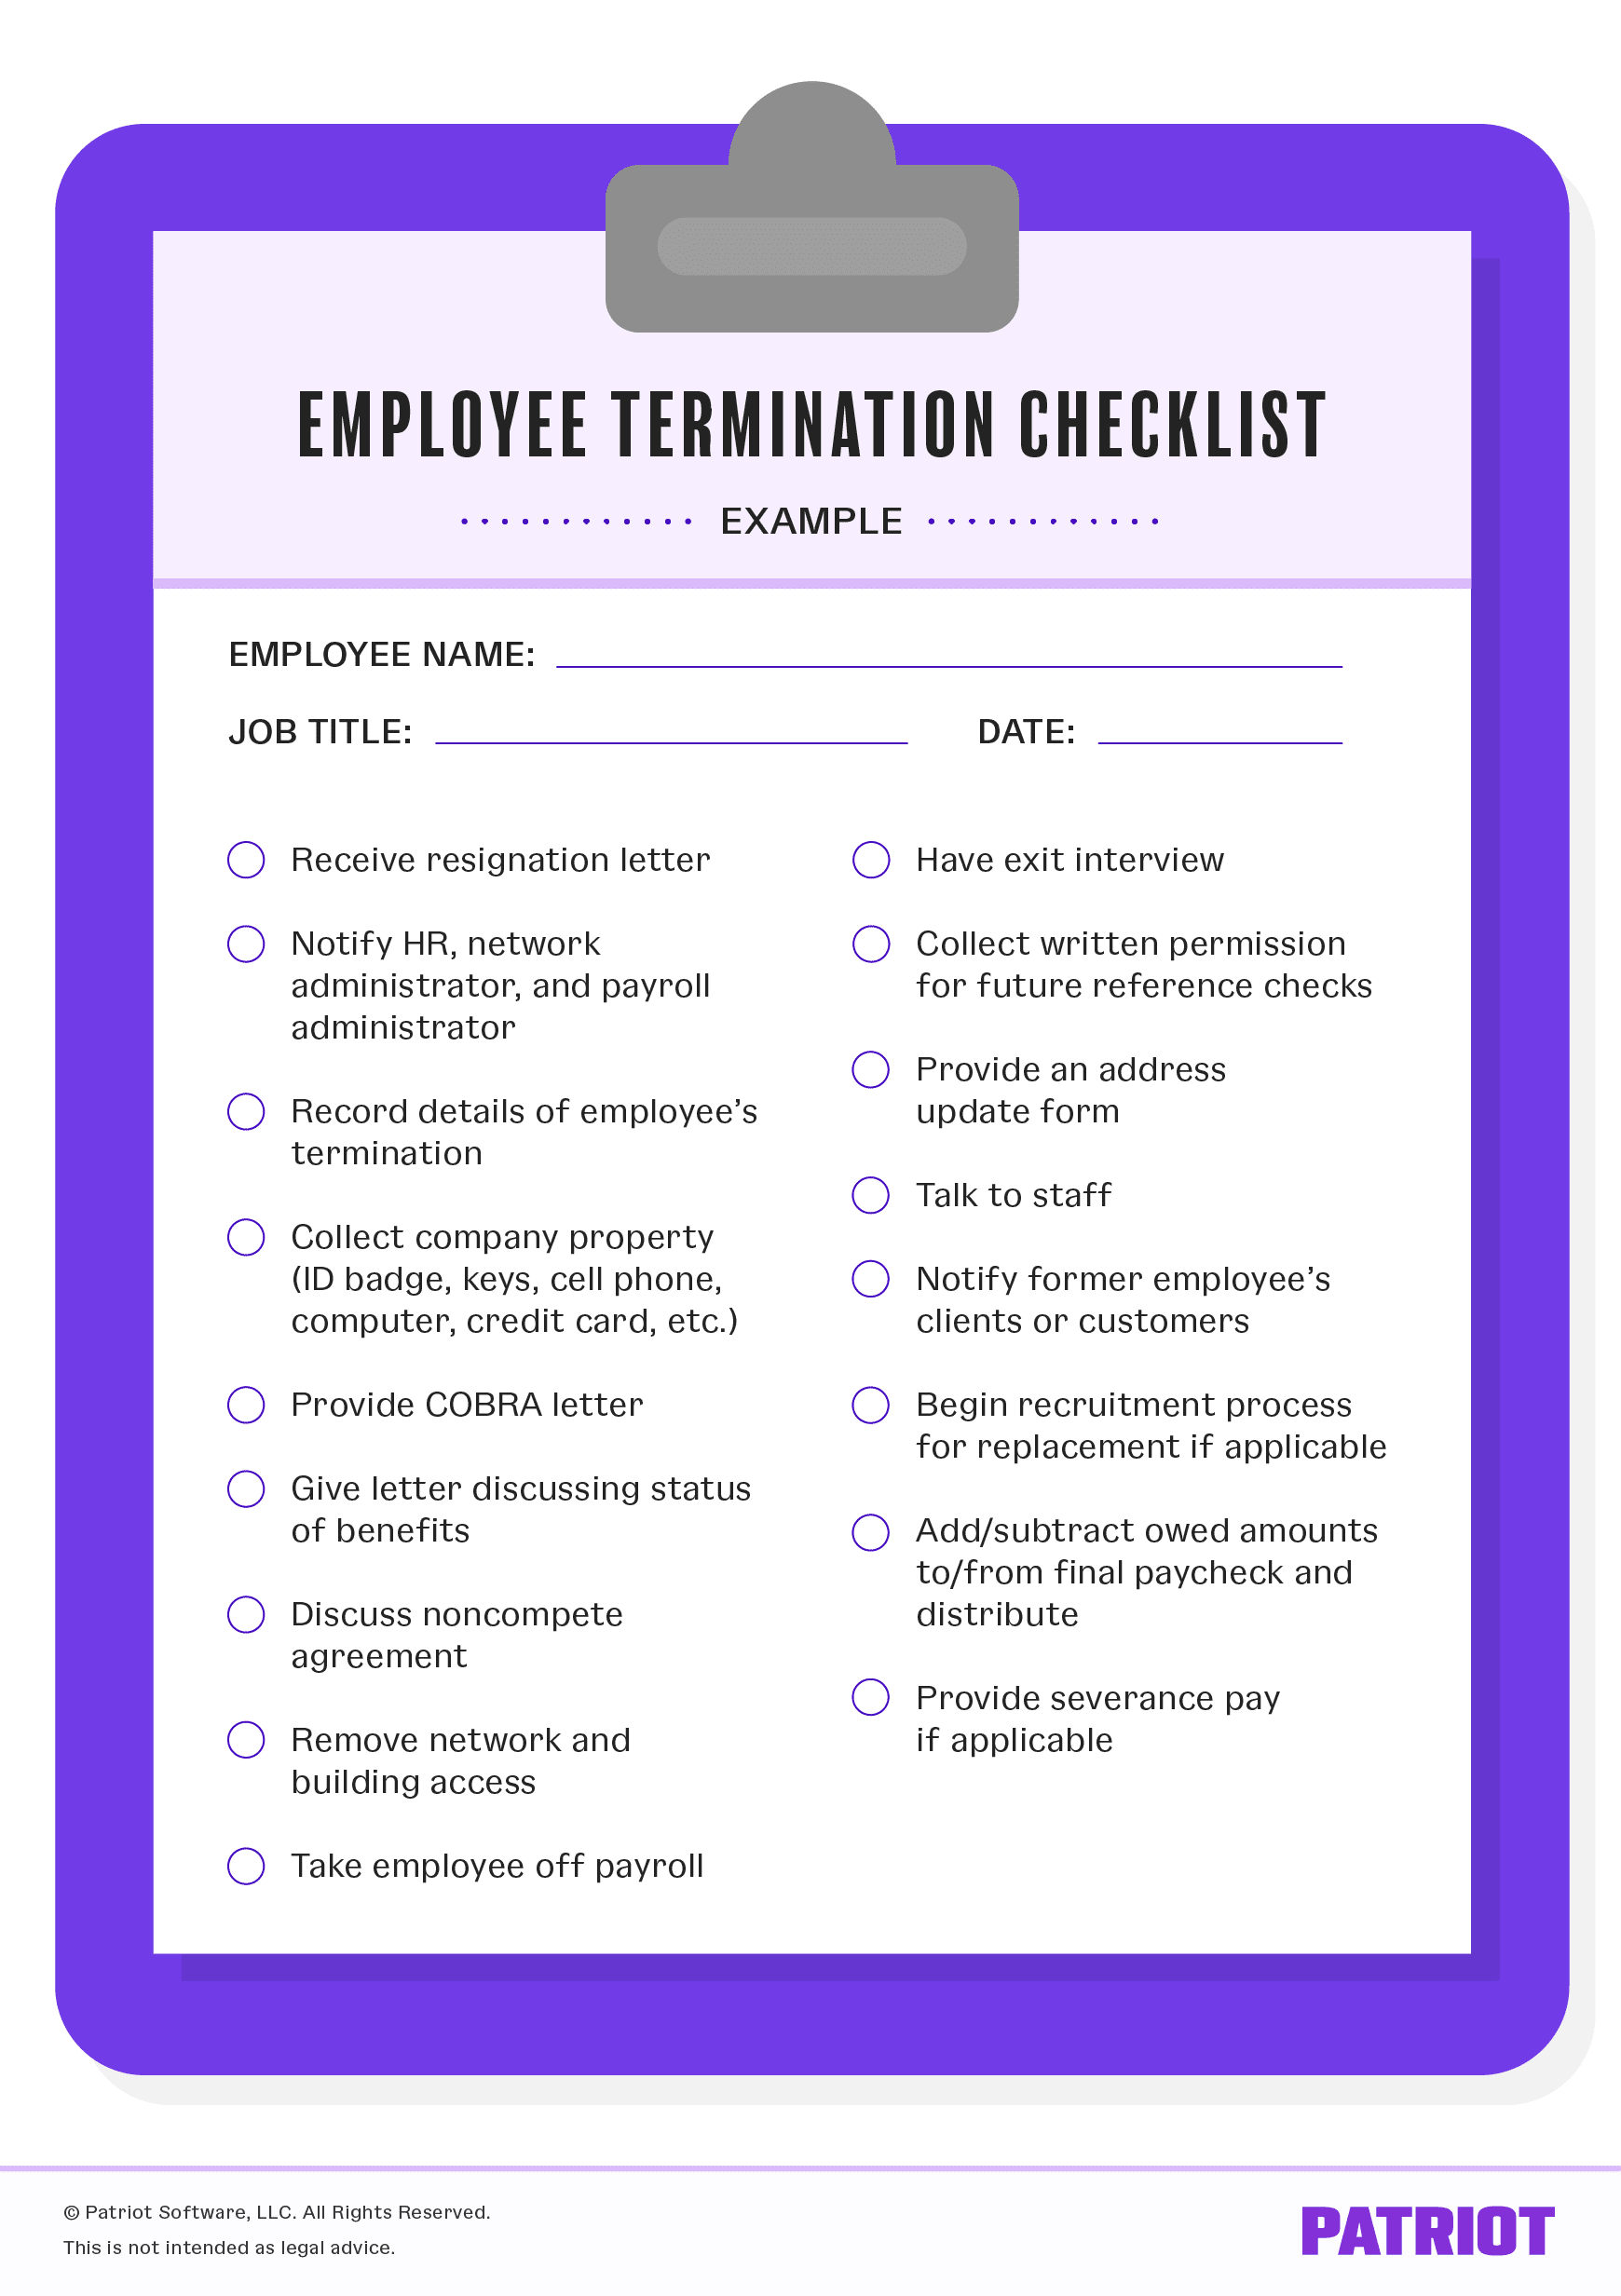 Employee Termination Checklist How to Stay Compliant & Professional